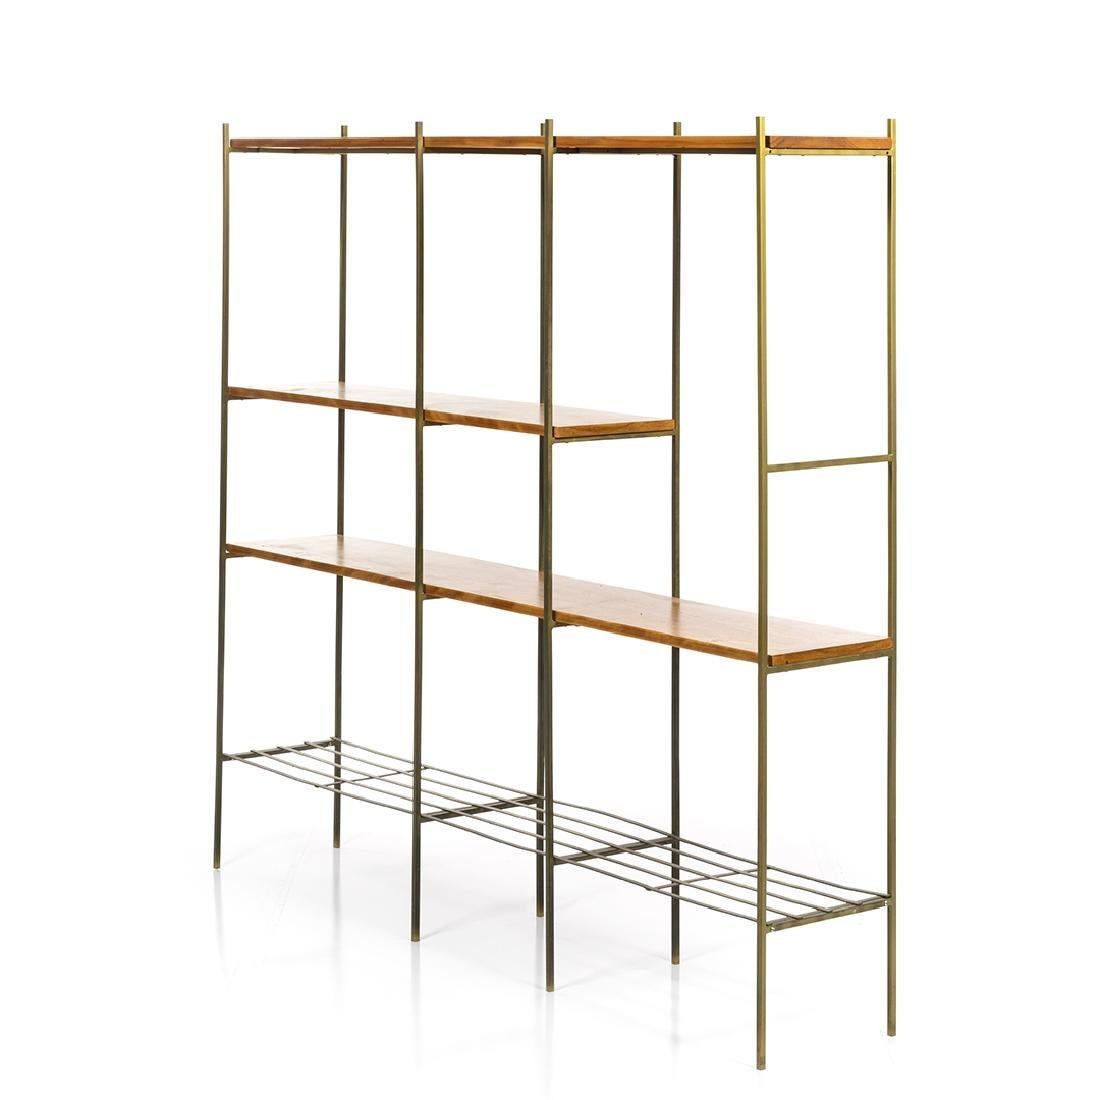 Midcentury Kenneth Lind room divider made with vintage walnut and metal, circa 1950s. Fair condition, some of the bottom shelf is slightly bent as seen in the photo, and the bottom left corner must be reattached, but remains functional.